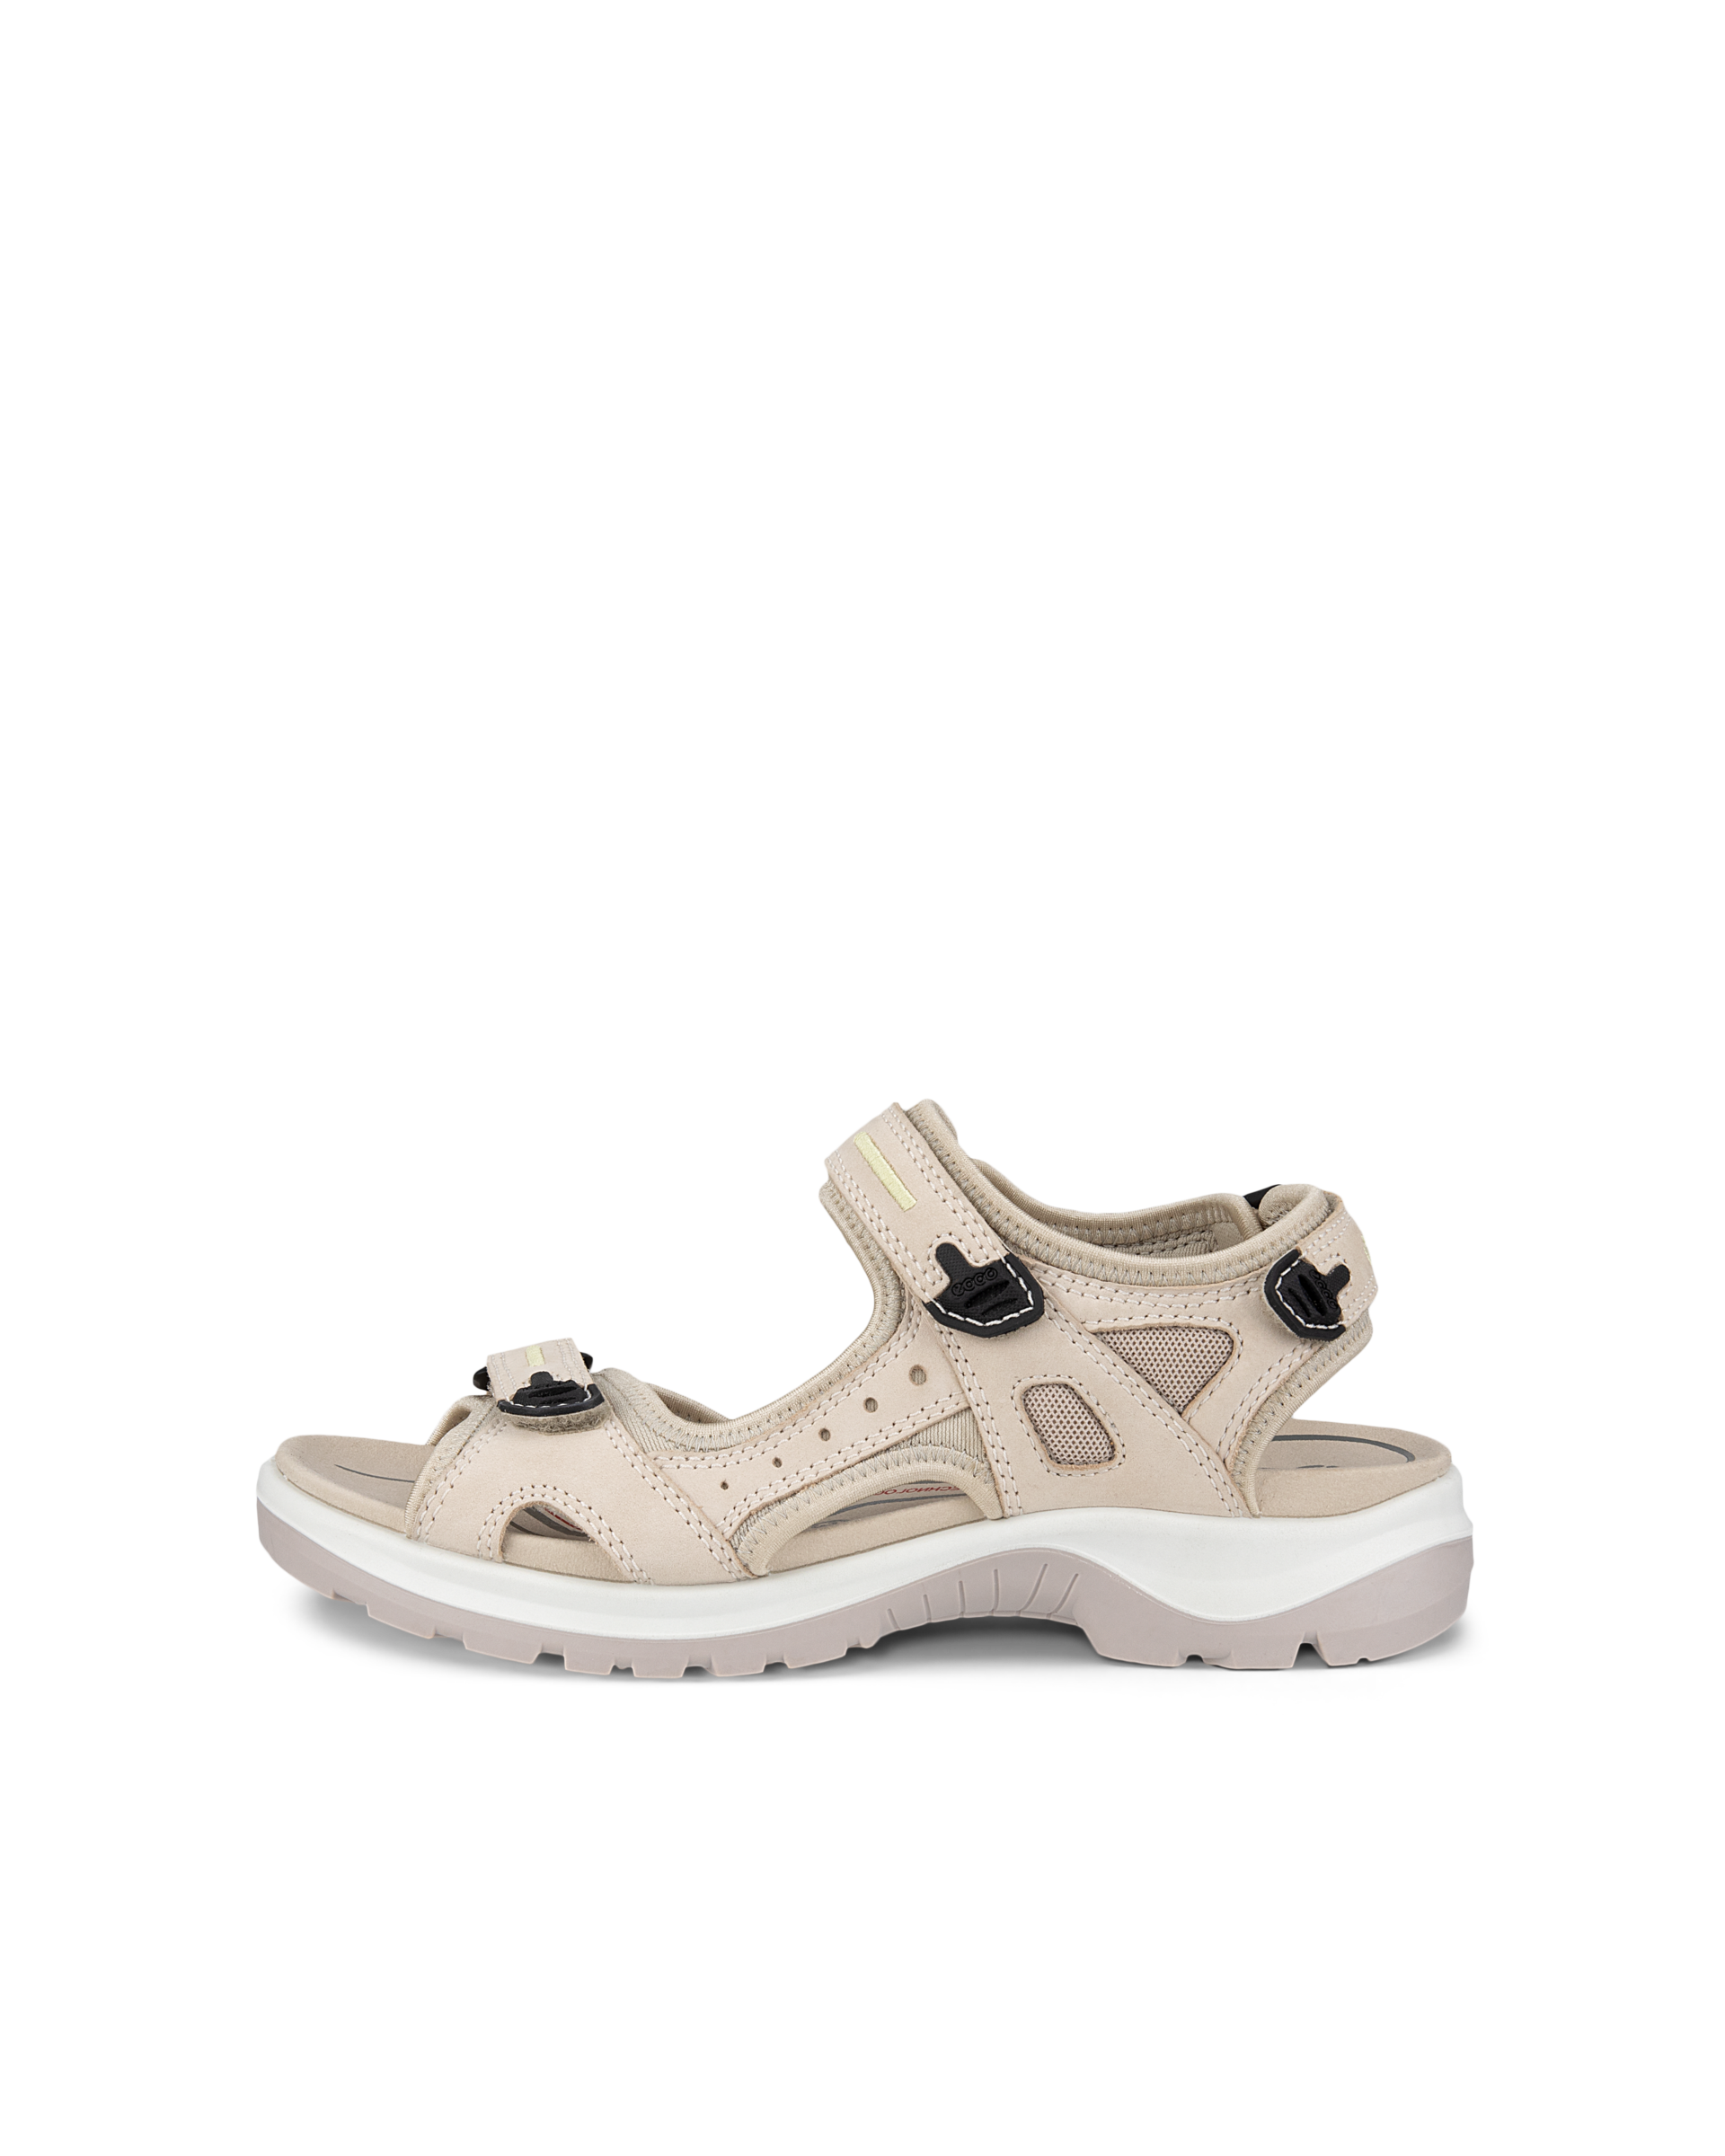 Bata White Sandals For Women [5] in Delhi at best price by Bata Shoe Store  - Justdial